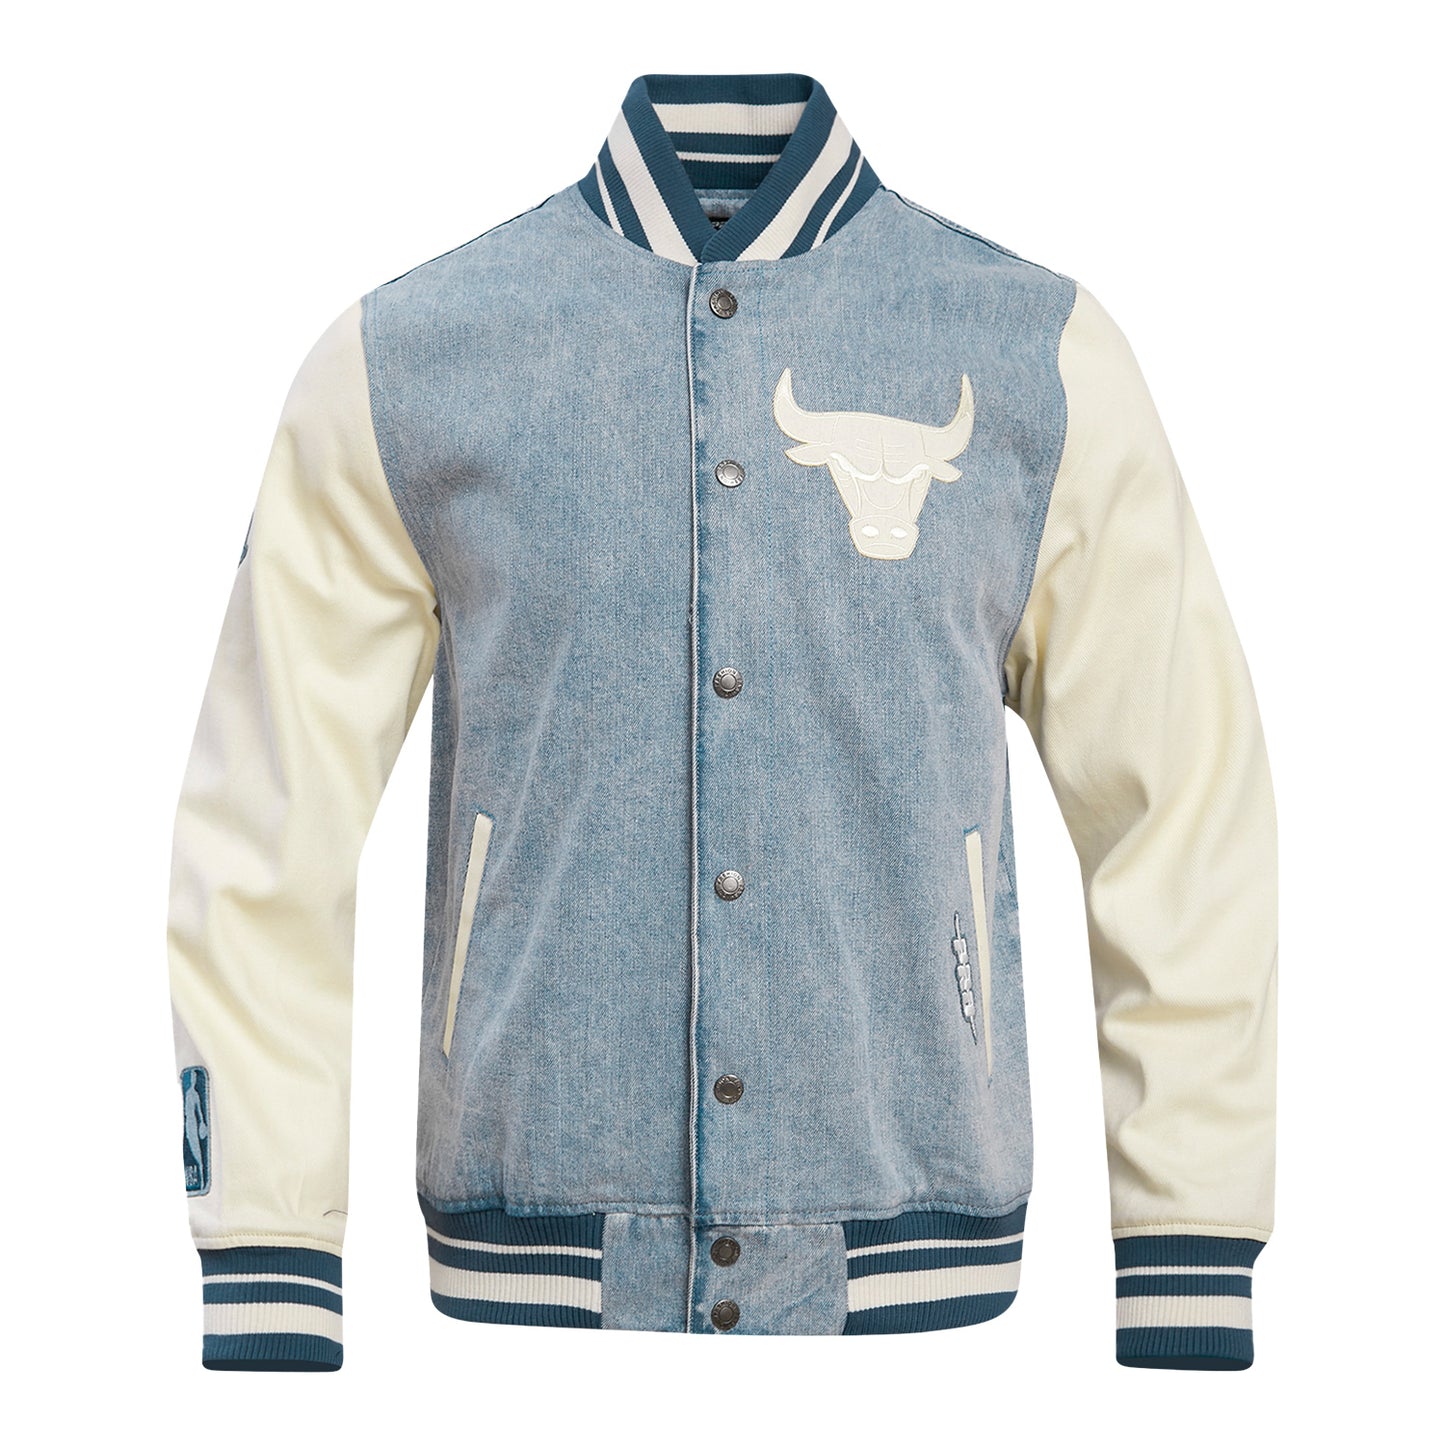 Blue & Green Varsity Jacket for Adults